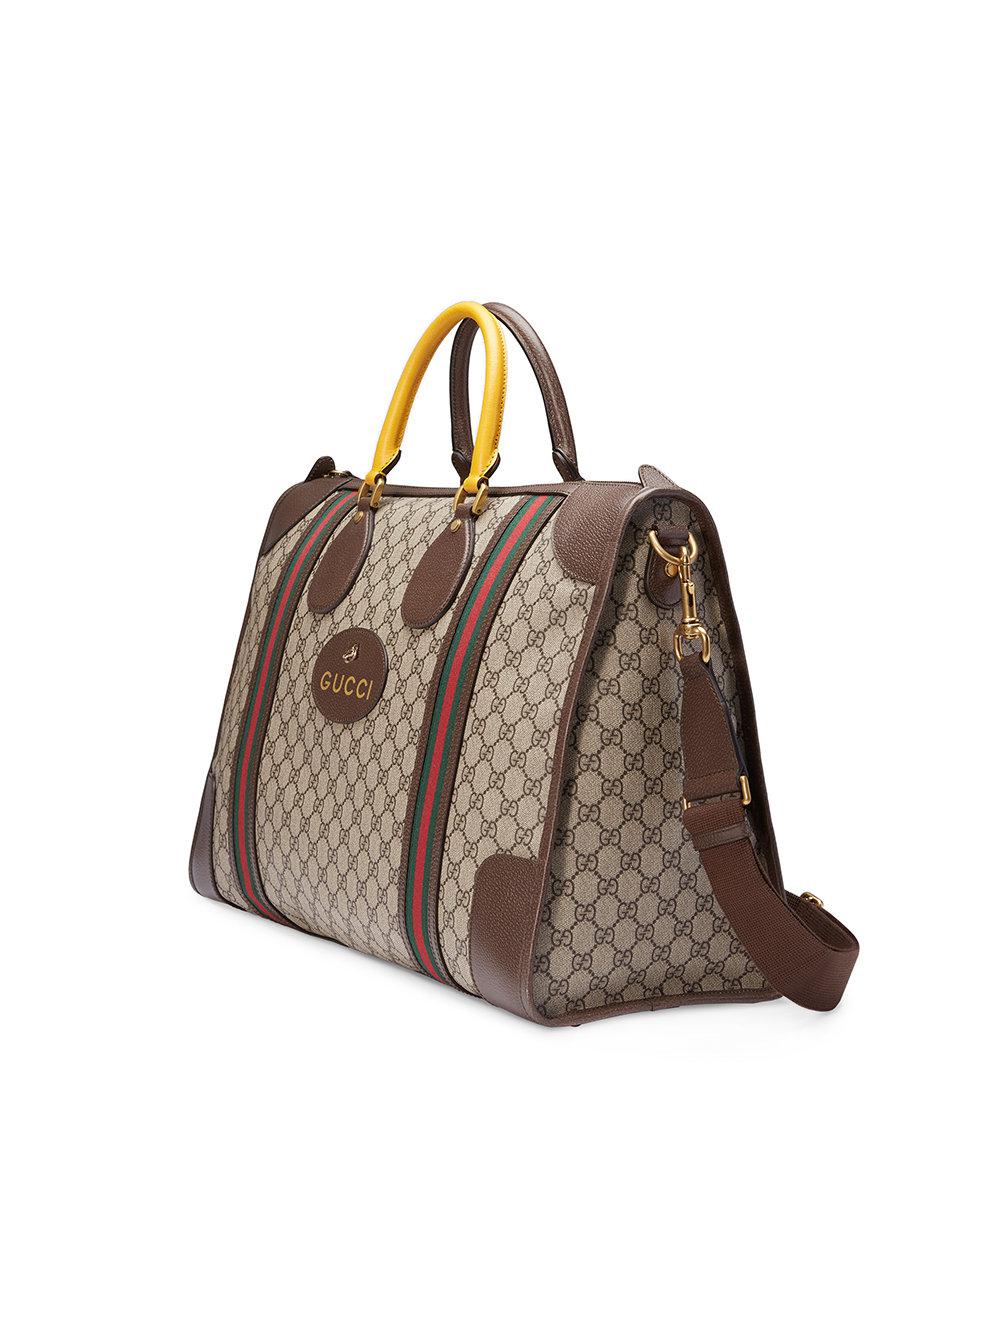 Maxi duffle bag with Web in beige and ebony Soft GG Supreme